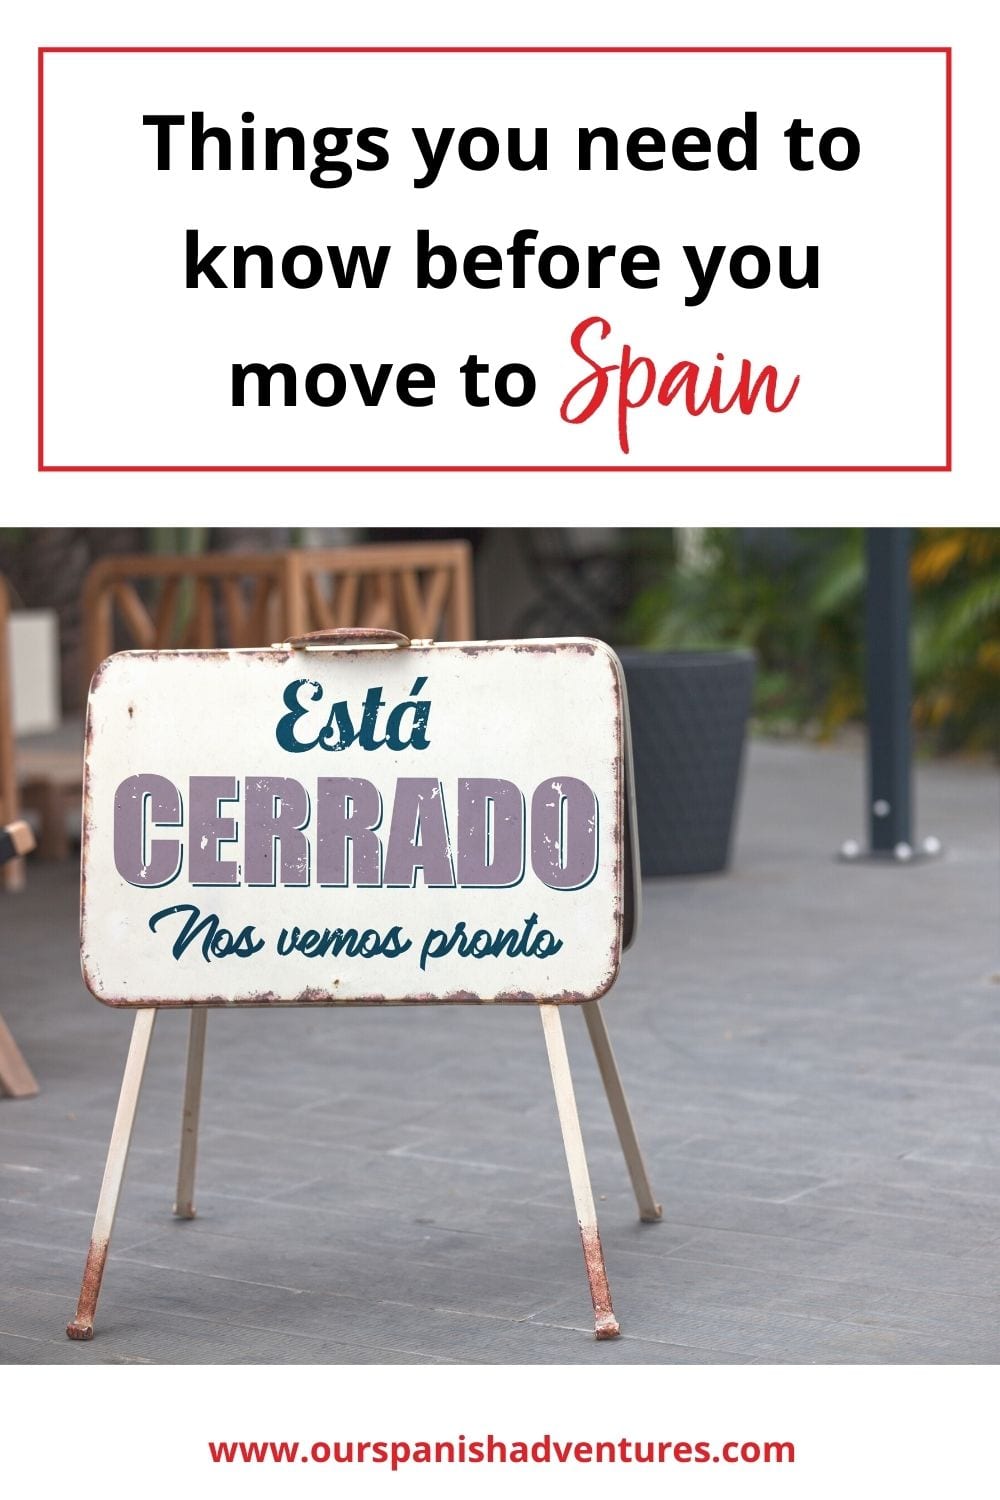 Things to know before you move to Spain | Our Spanish Adventures